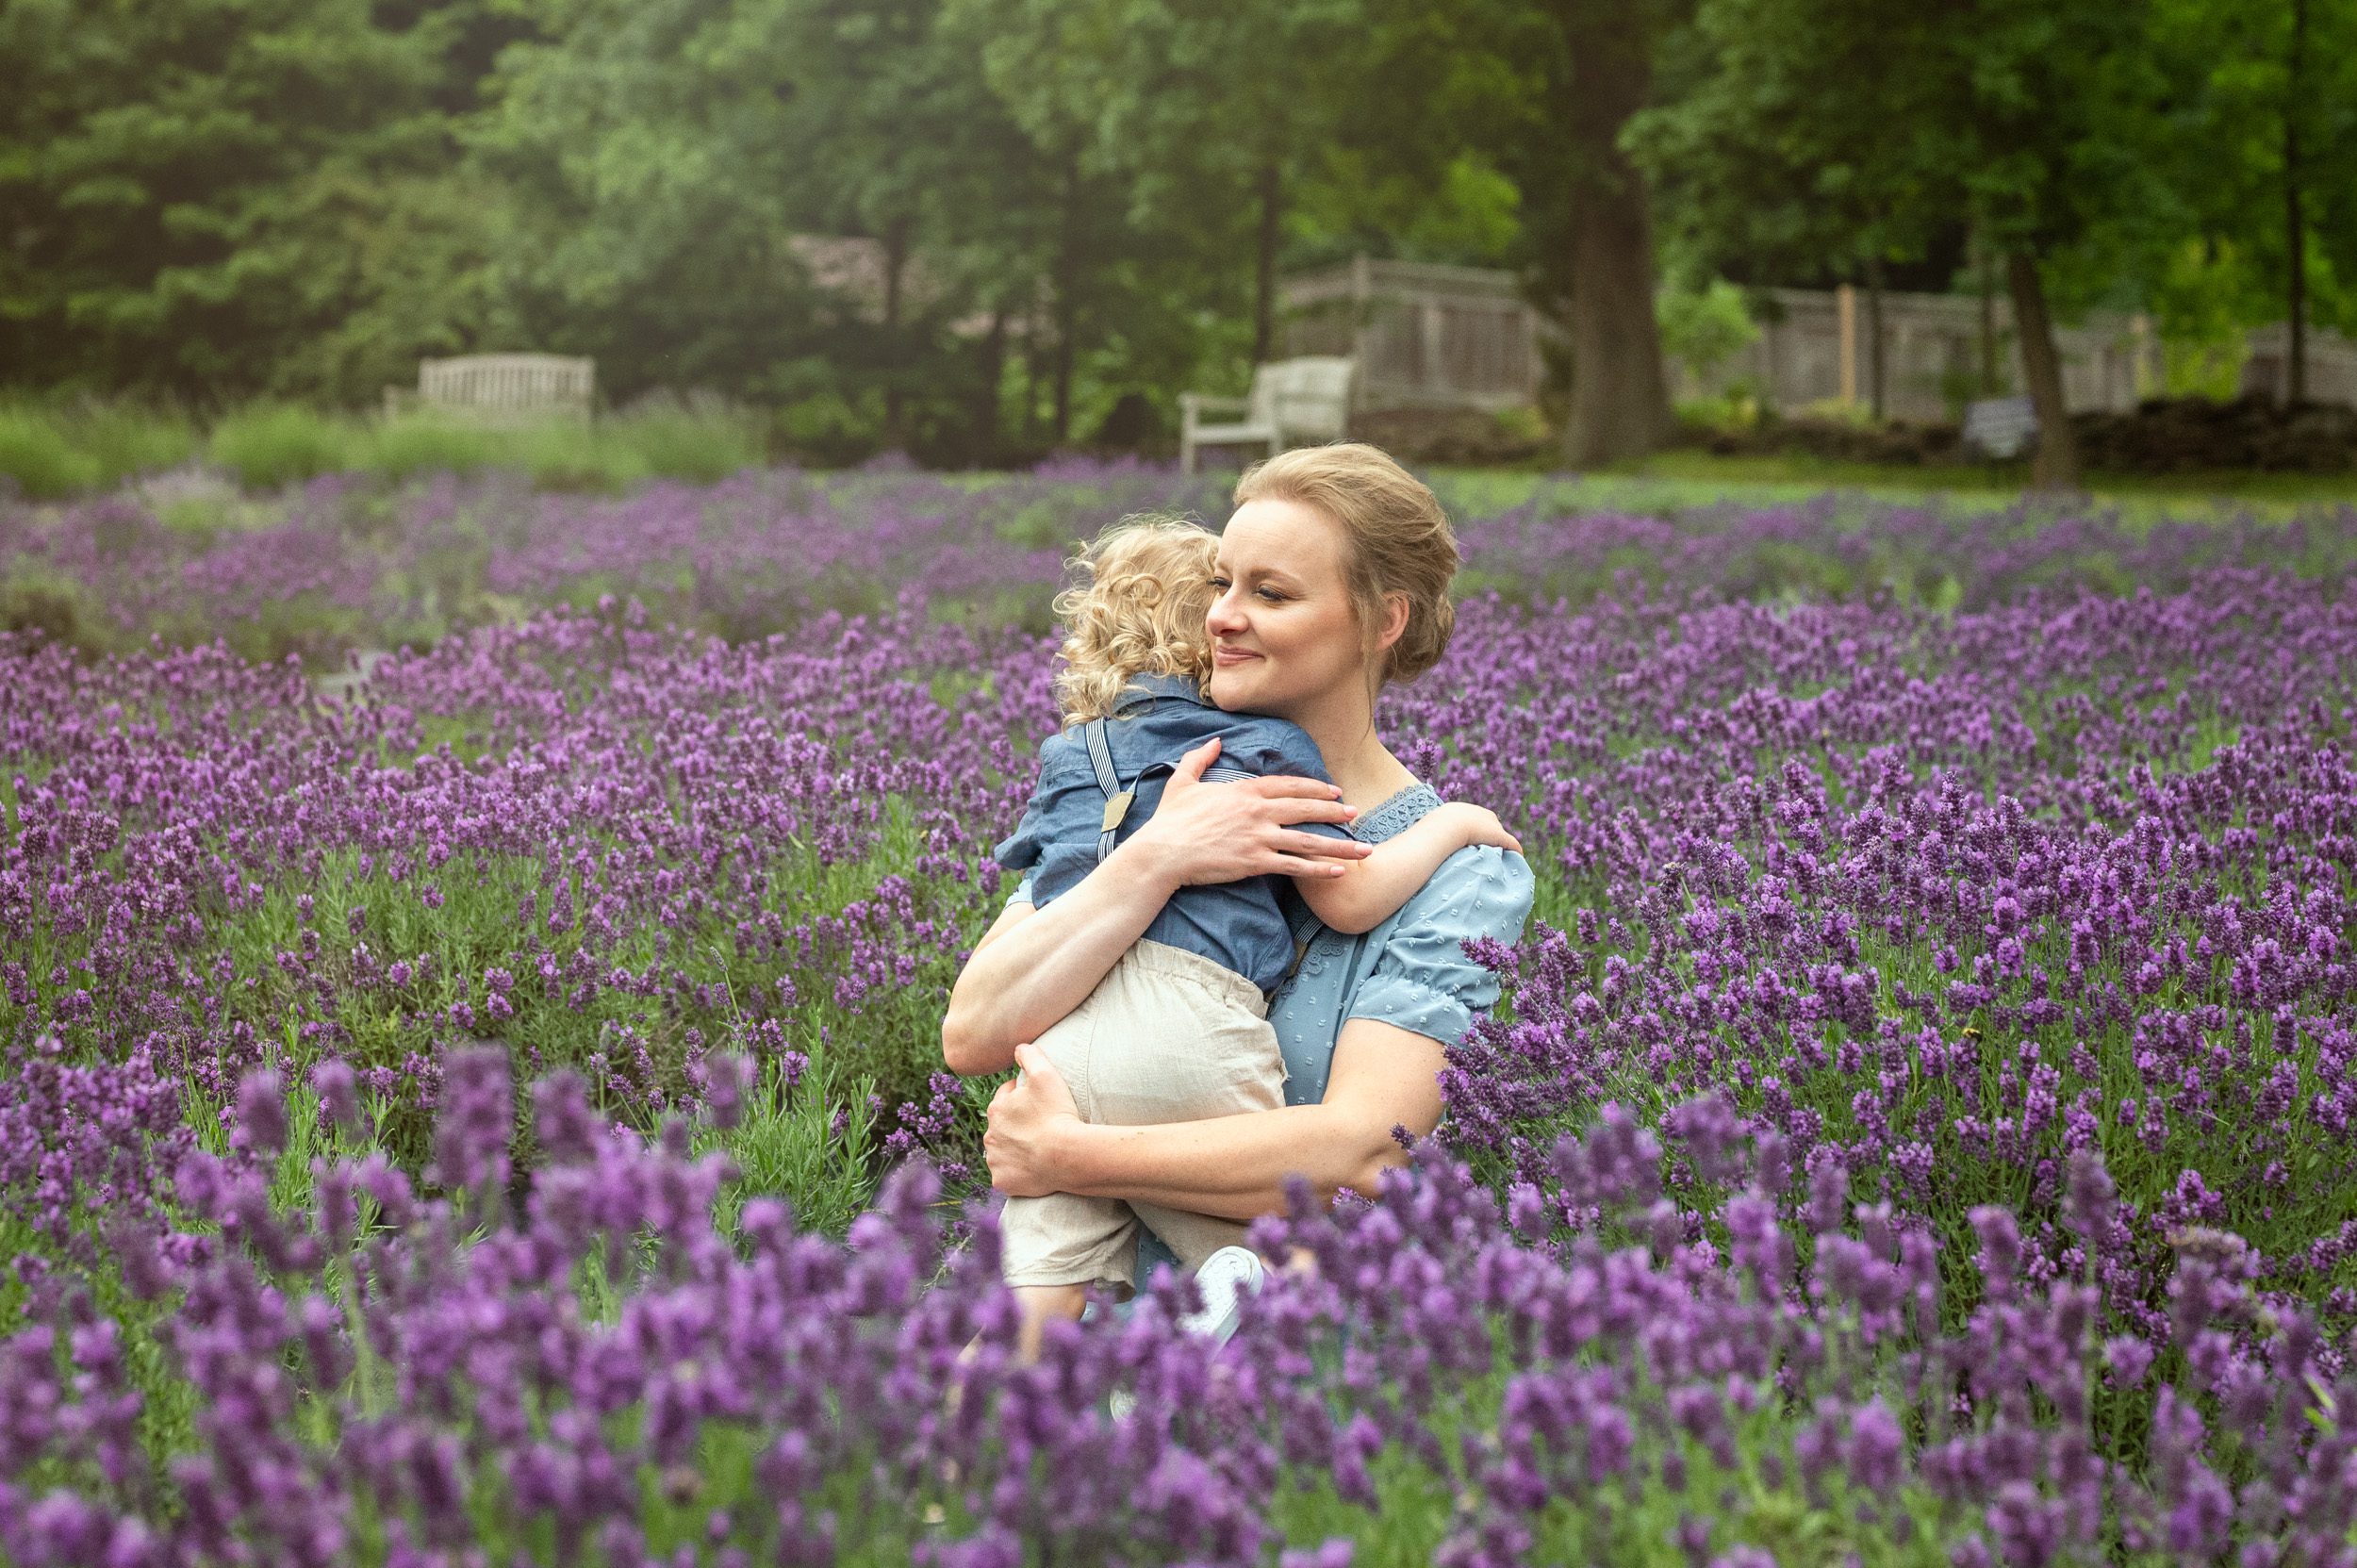 a mom hugging her son in a field full of purple lavender in full bloom during a family photo session